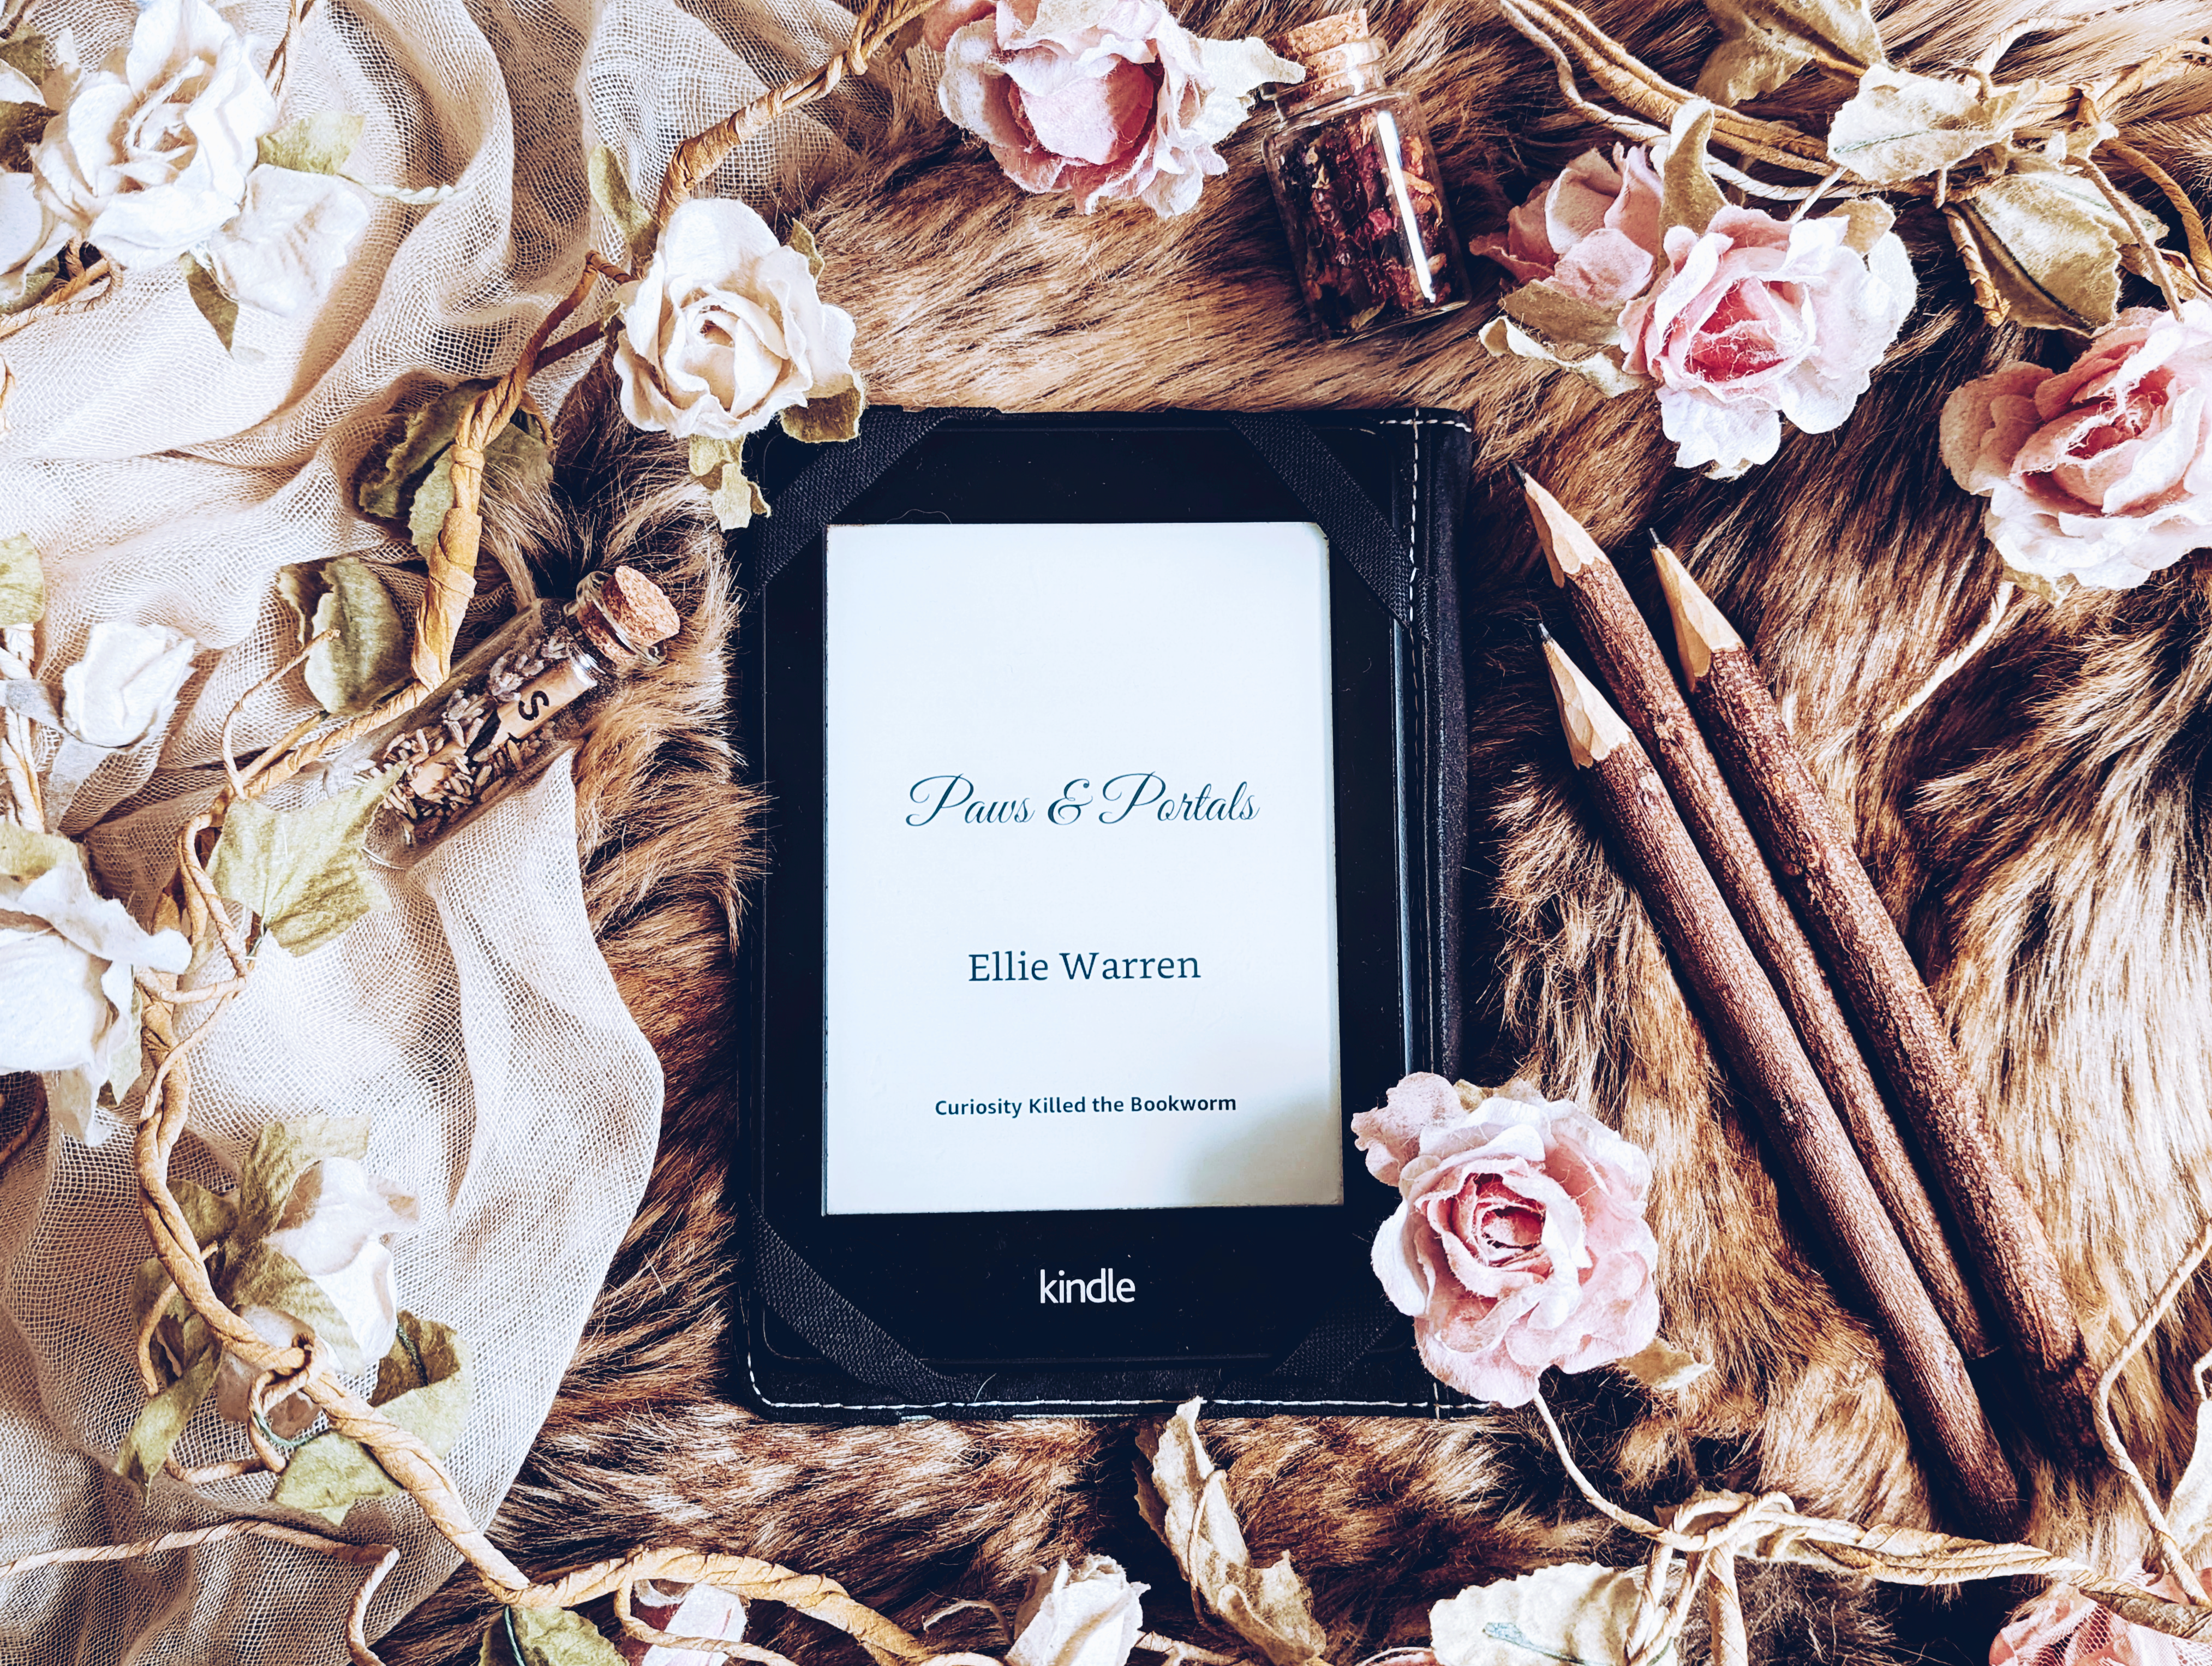 A Kindle showing the title page of Paws and Portals by Ellie Warren